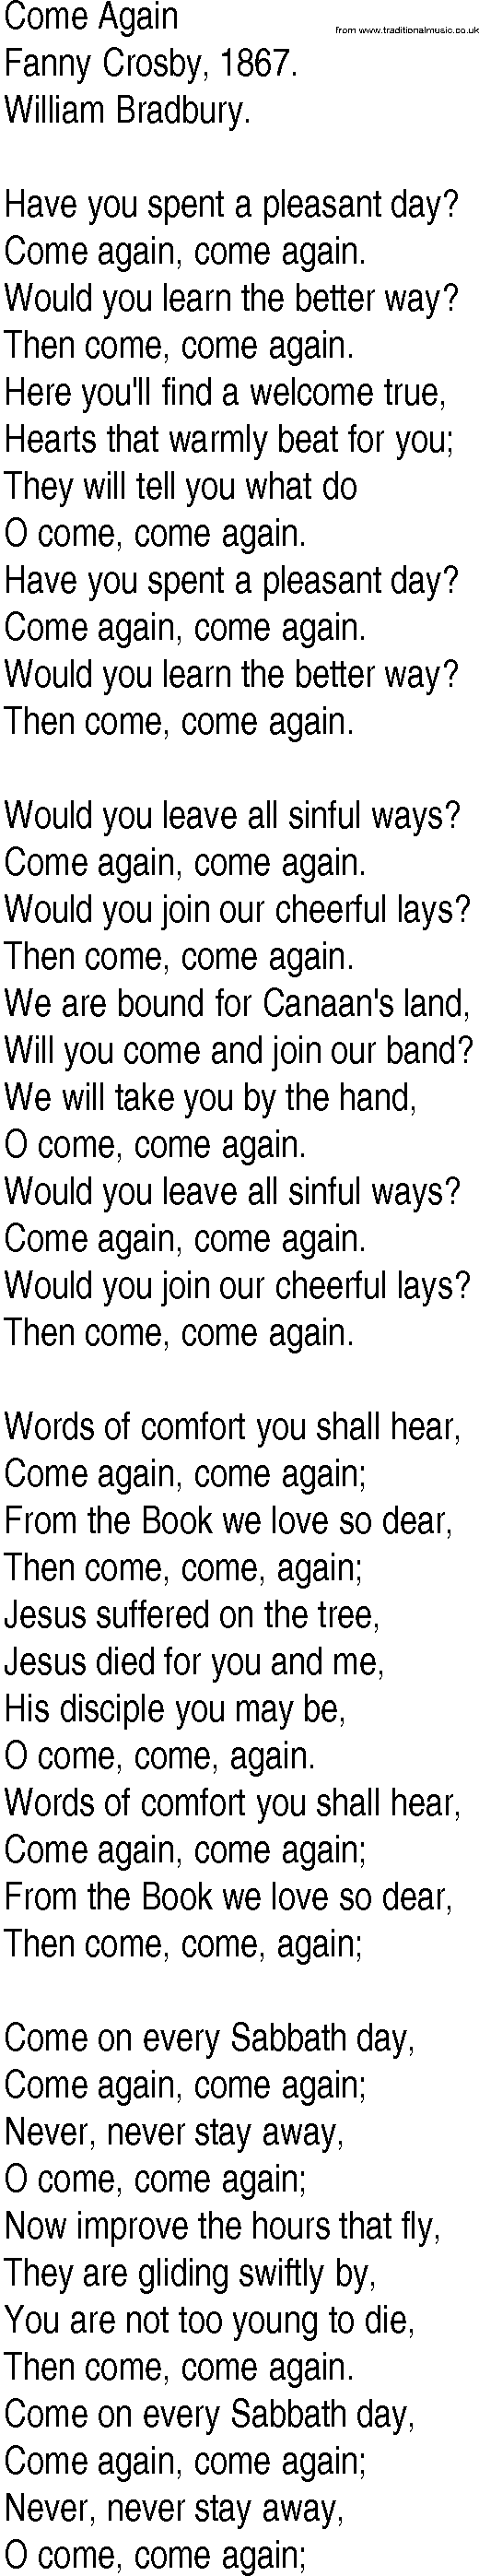 Hymn and Gospel Song: Come Again by Fanny Crosby lyrics